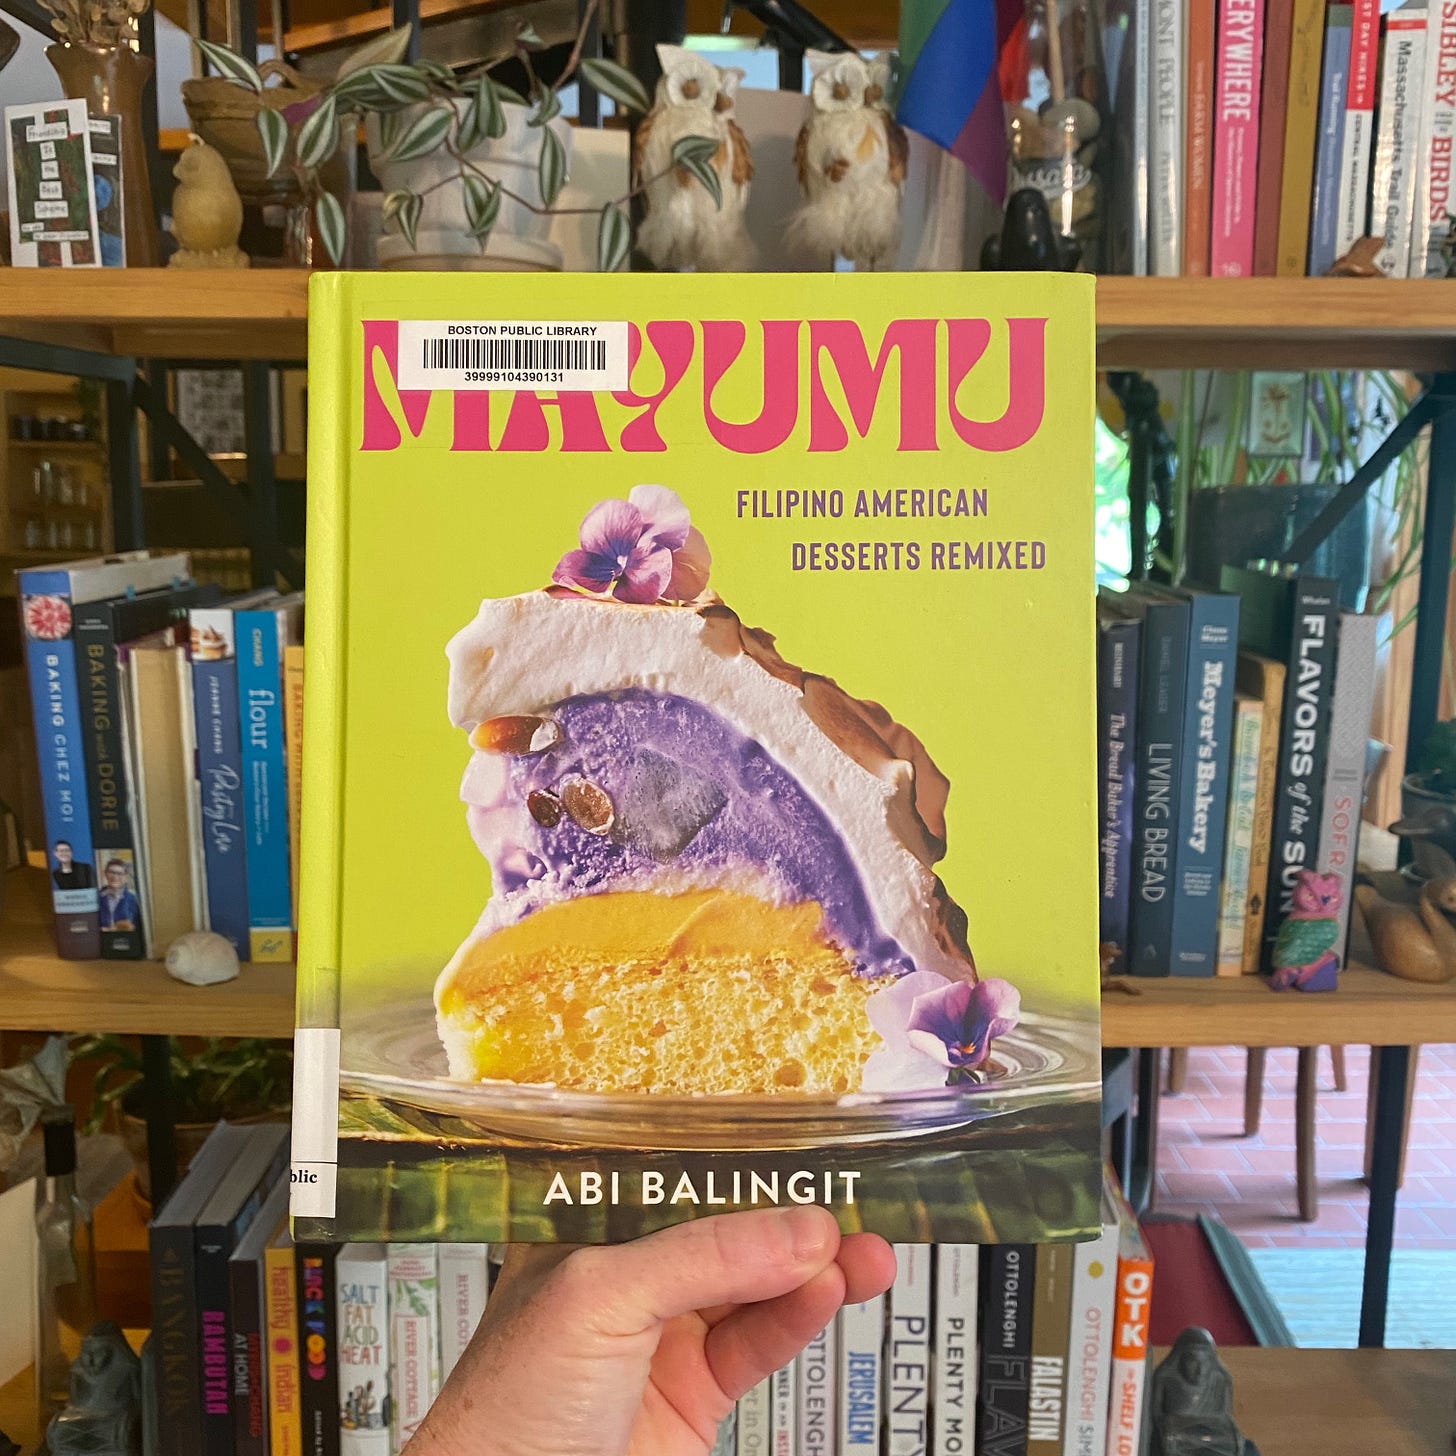 I’m holding up this cookbook in front of a shelf of colorful cookbooks.